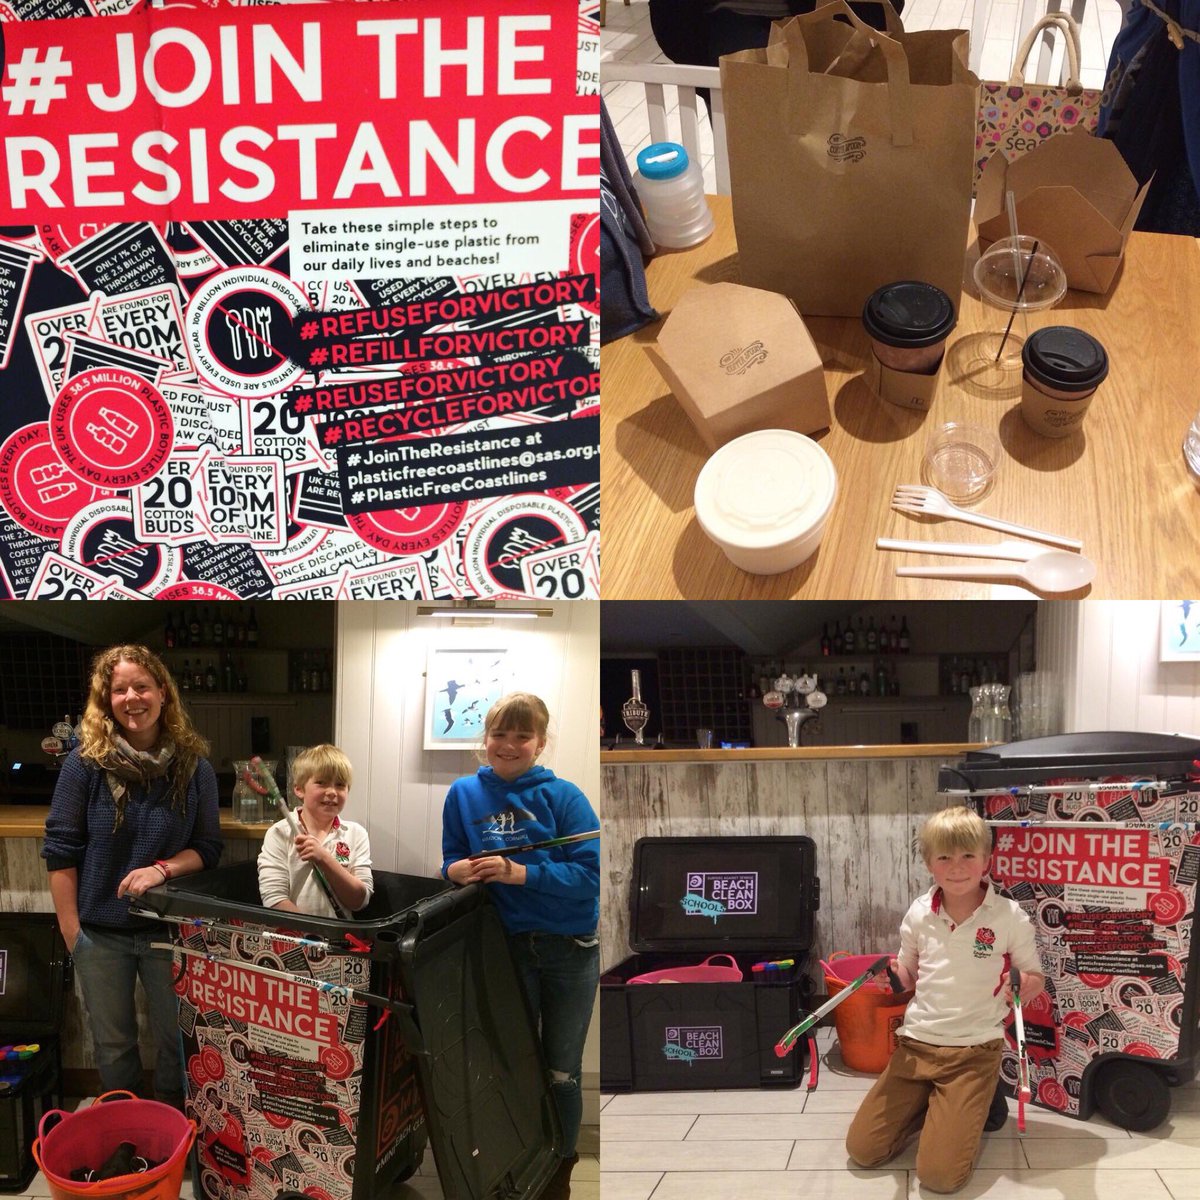 Thanks to all those who came to our Plastic Free Clinic last night especially contributions from @HeatherKoldewey @thecopperspoon @OceanHighKernow, Marazion School & @godolphinarms for hosting in #plasticfree style! Next one in a month - watch this space!